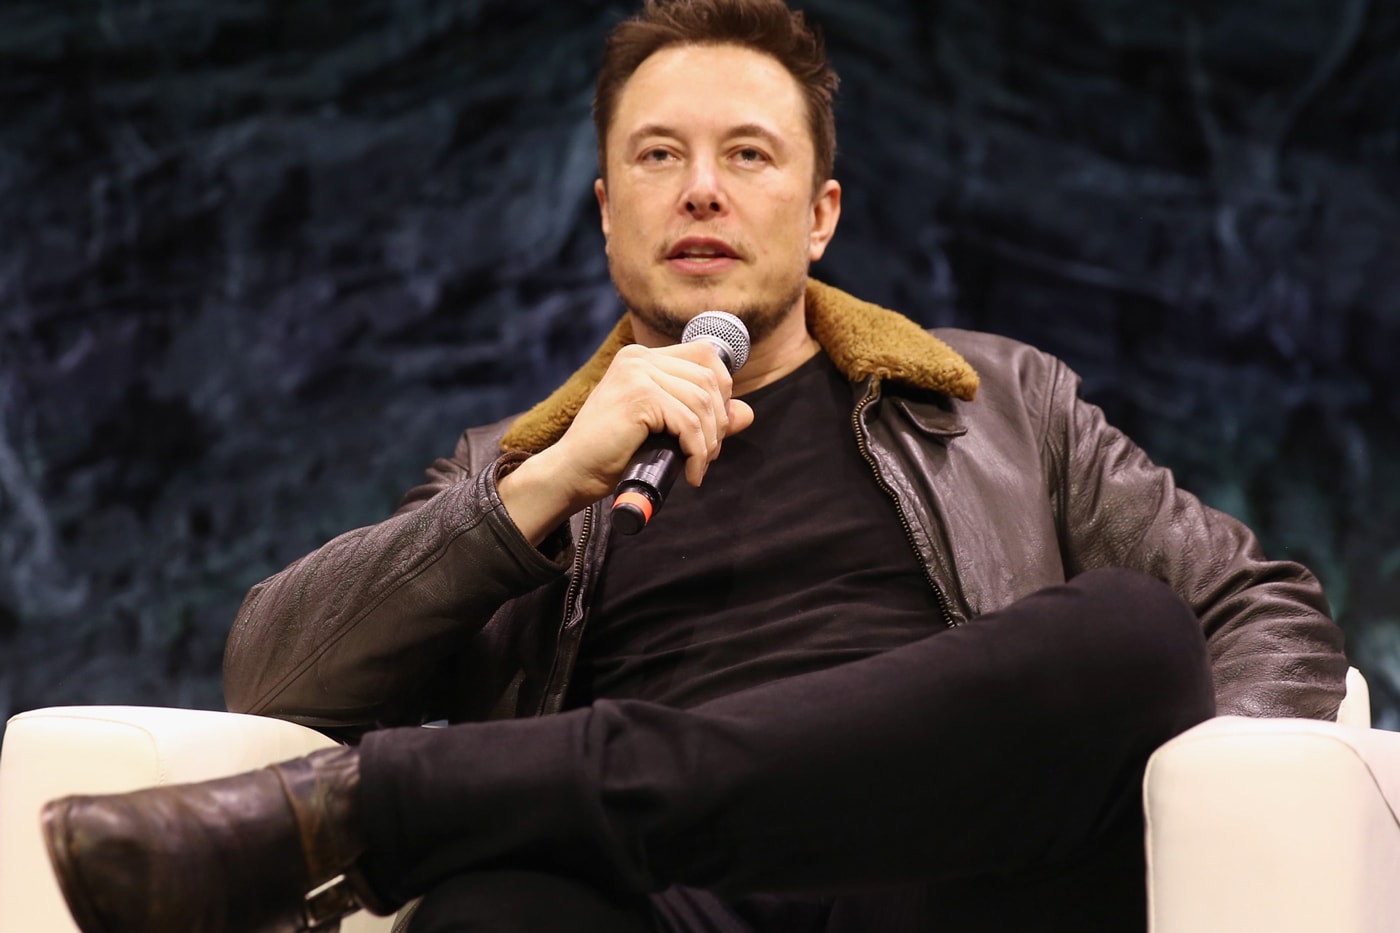 Elon Musk 70 Percent Chance Moving To Mars Planet Space Rocket Tesla SpaceX Axios on HBO Travel 